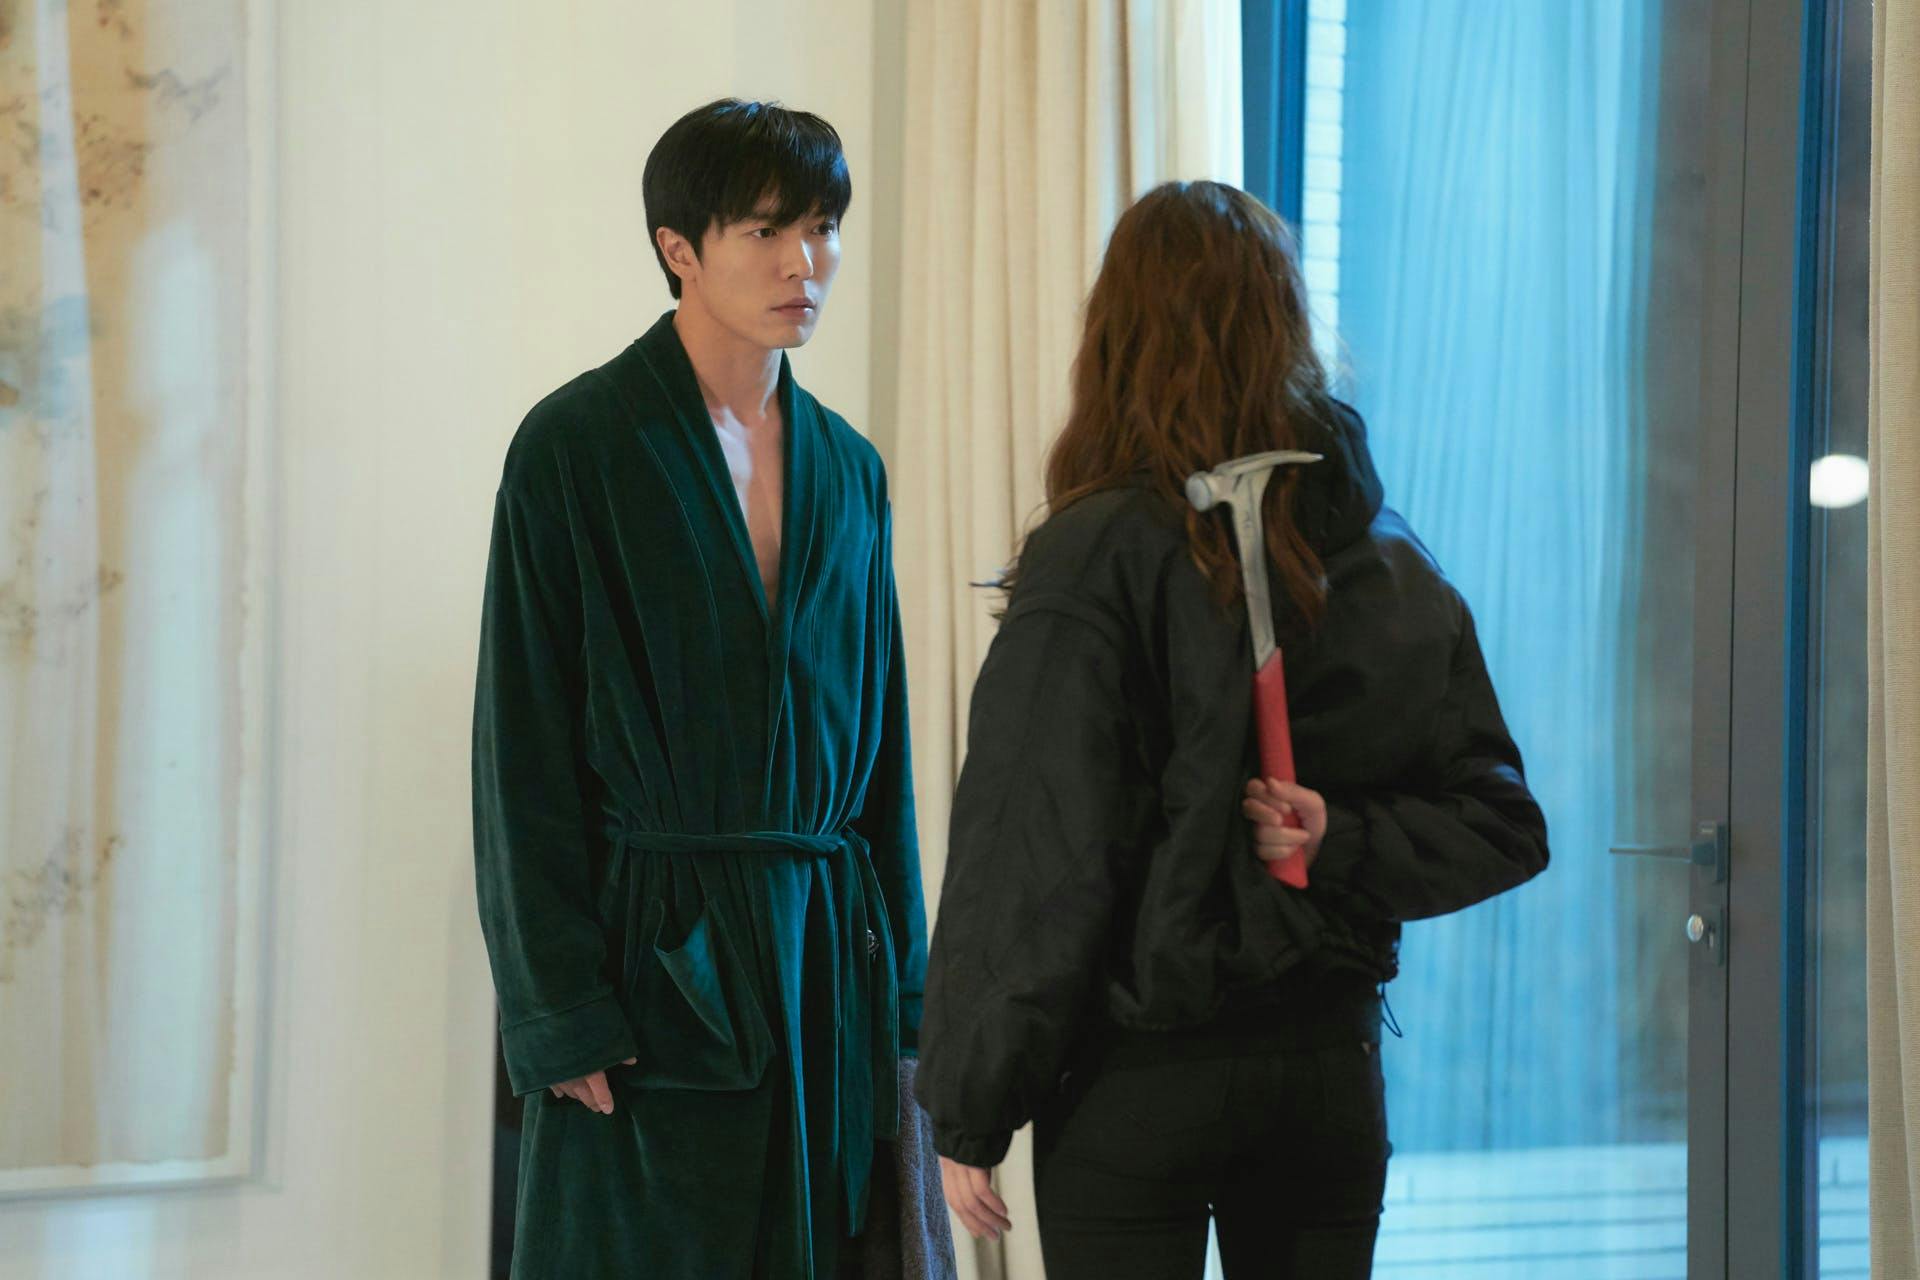 Kim Jae Wook and Krystal Jung Talk ‘Crazy Love’, First Impressions and More